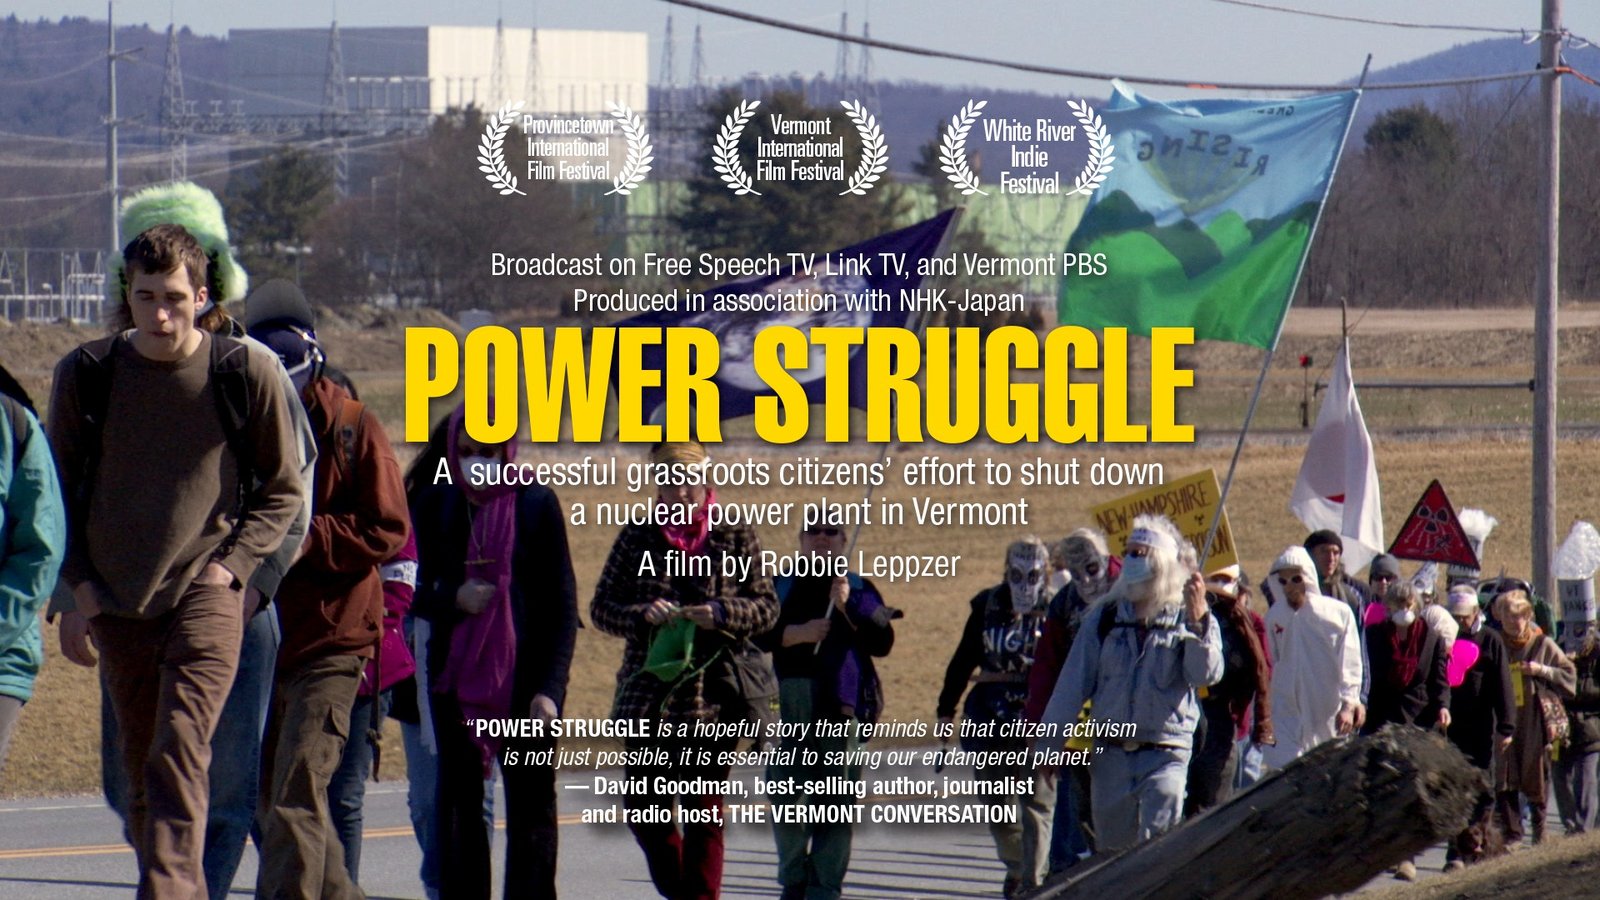 Power Struggle - A Grassroots Effort to Shut Down a Nuclear Power Plant